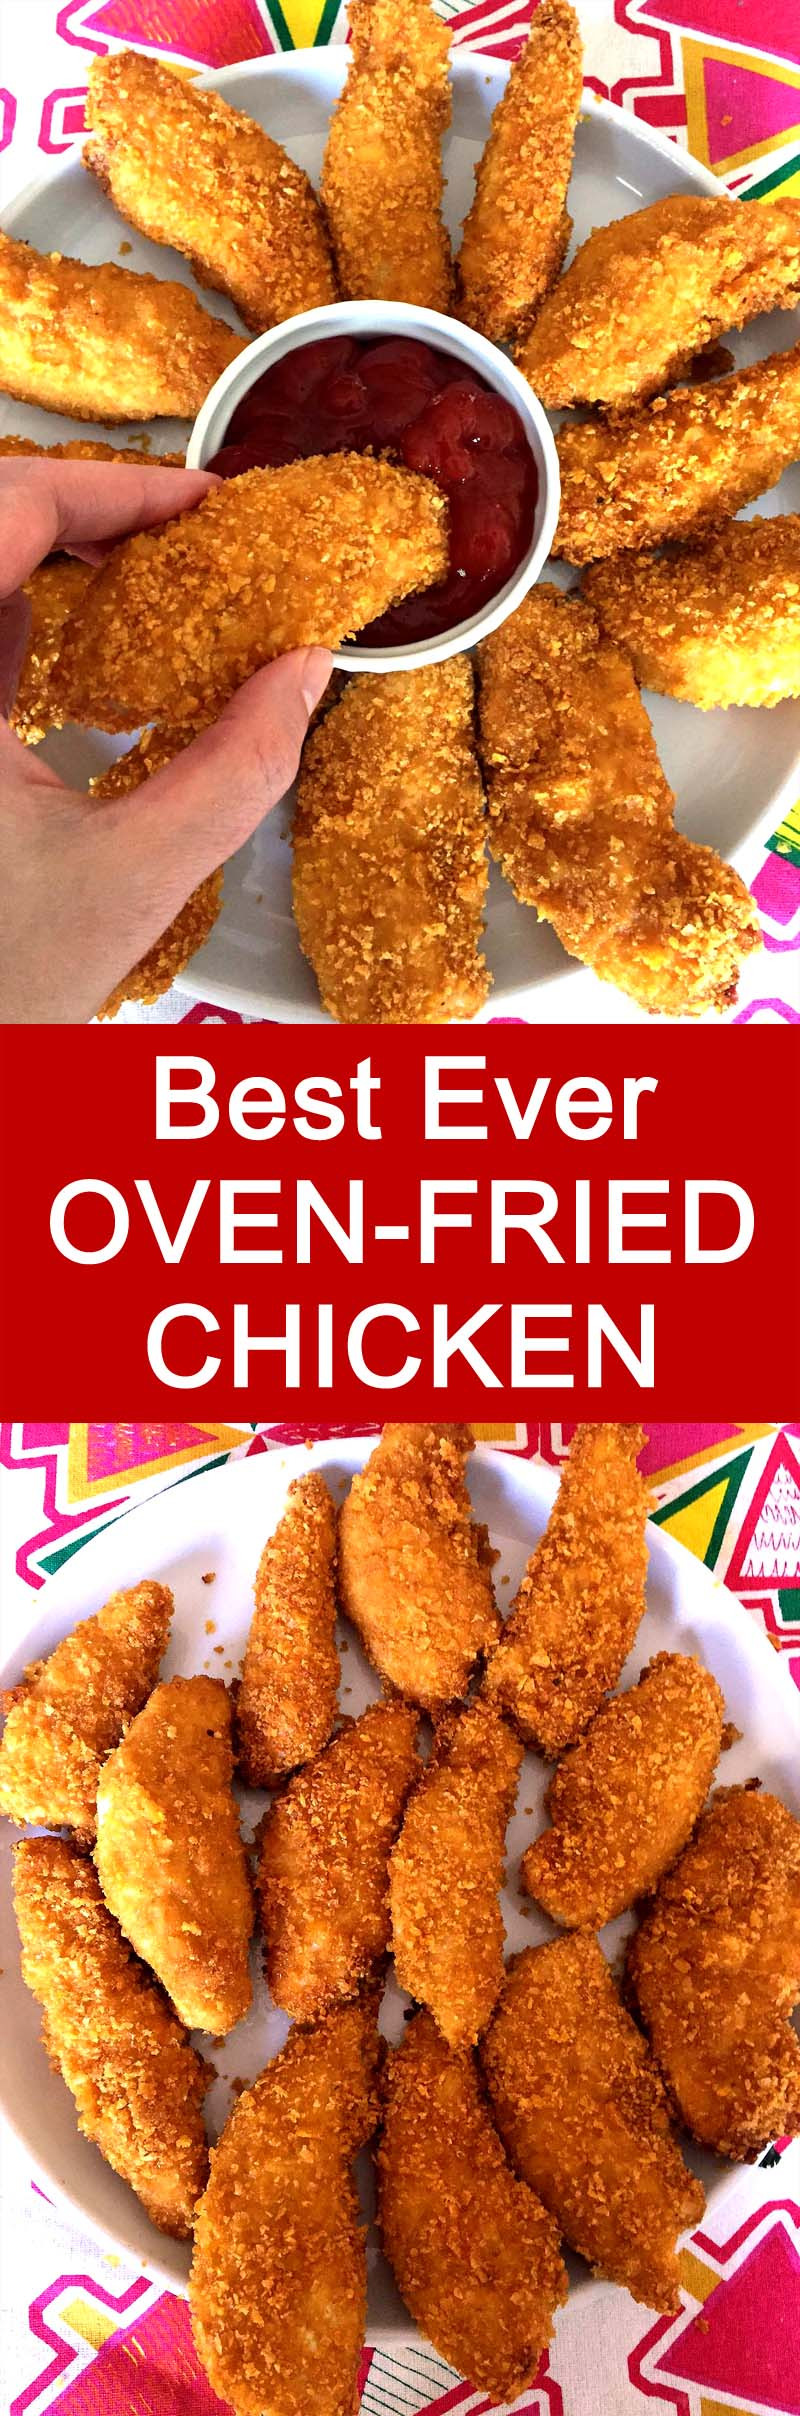 Oven Fried Chicken Recipes
 Best Ever Crispy Baked Oven Fried Chicken Recipe – Melanie